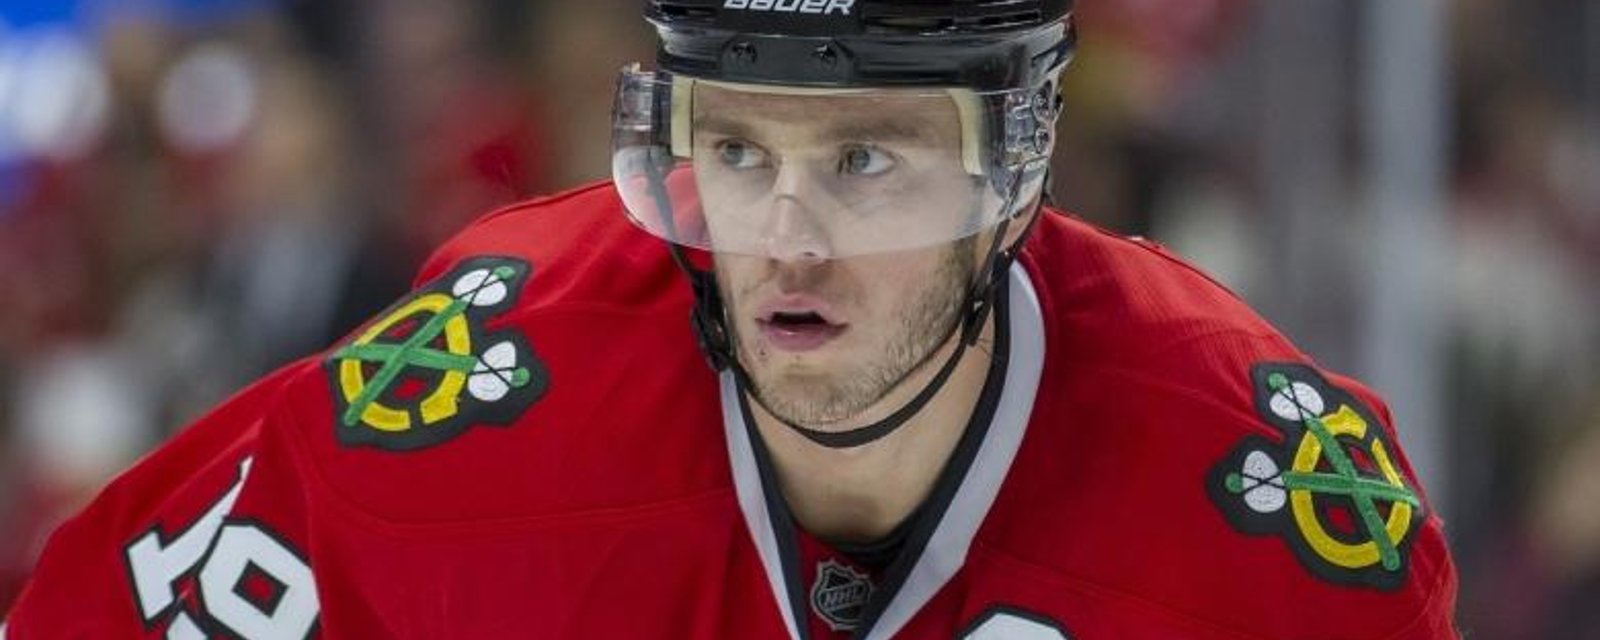 Video: Jonathan Toews takes a nasty elbow to the head.